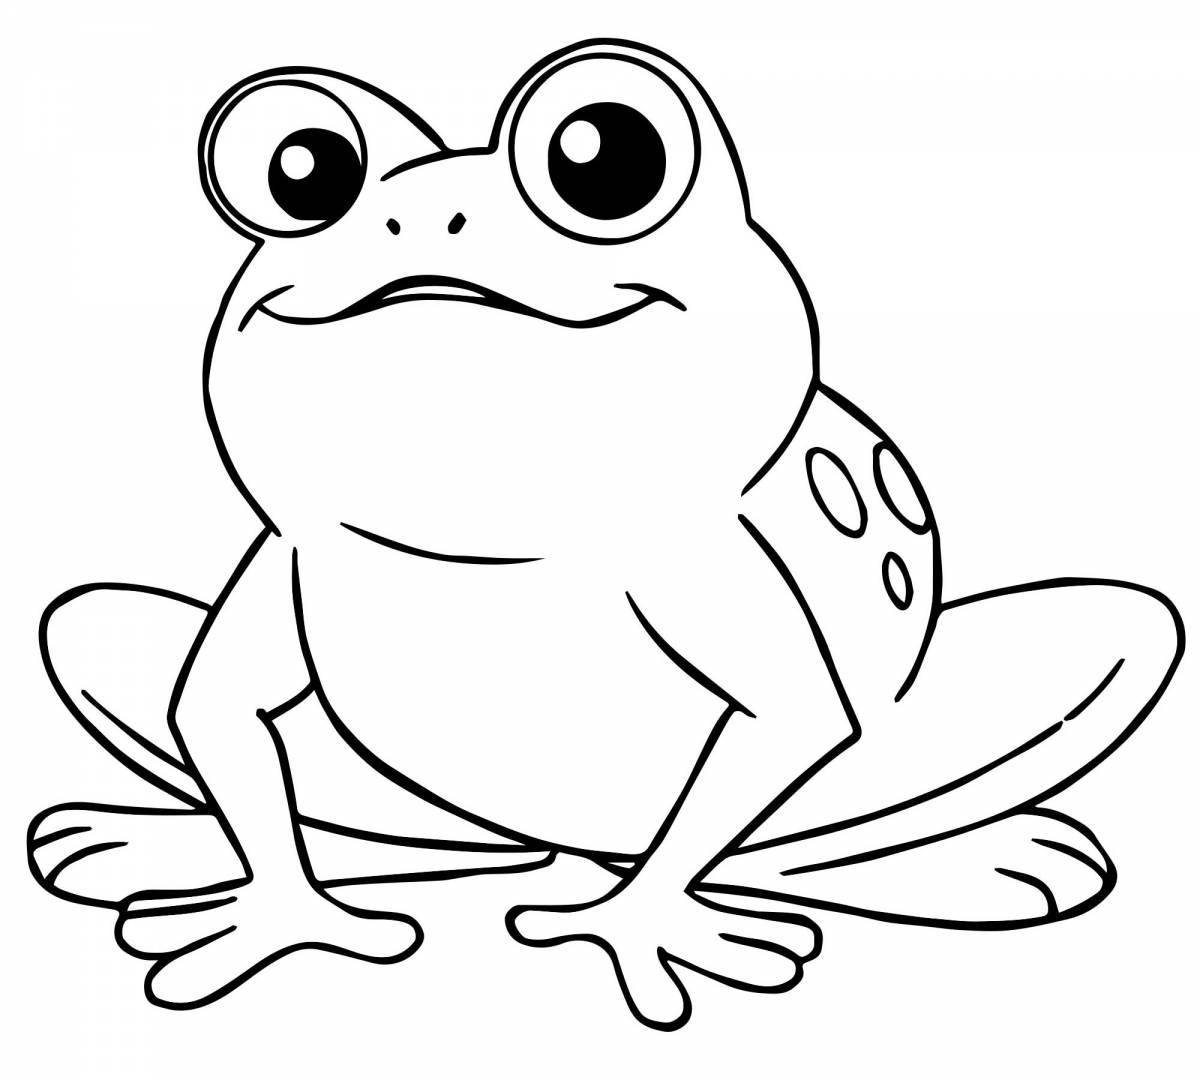 A lovely frog coloring book